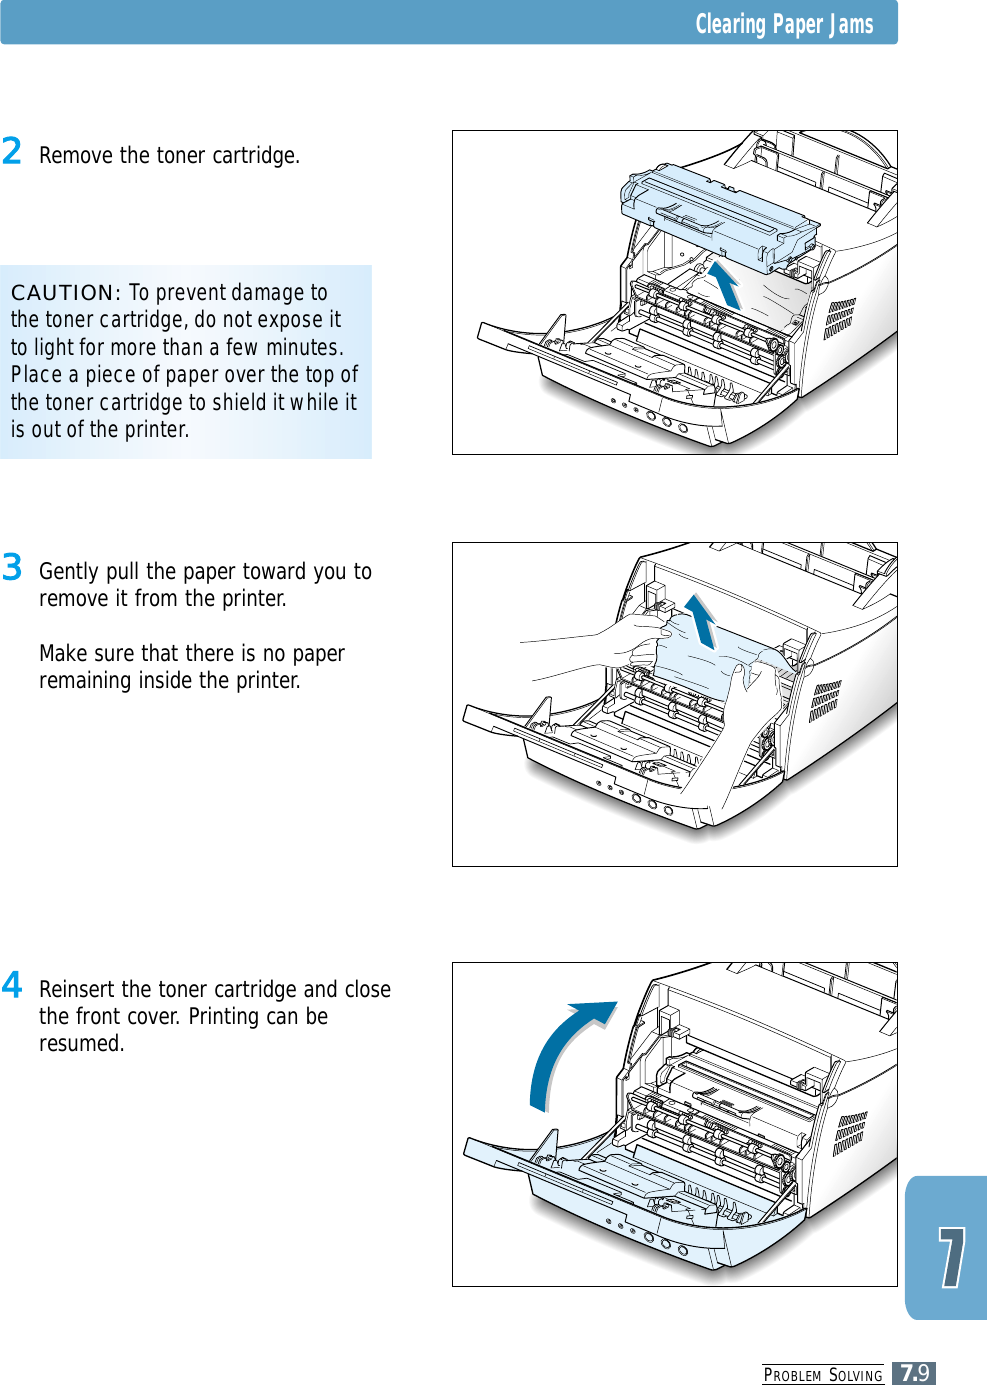 PROBLEM SOLVING7.9Clearing Paper Jams4 Reinsert the toner cartridge and closethe front cover. Printing can beresumed.3 Gently pull the paper toward you toremove it from the printer.Make sure that there is no paperremaining inside the printer.CAUTION: To prevent damage tothe toner cartridge, do not expose itto light for more than a few minutes.Place a piece of paper over the top ofthe toner cartridge to shield it while itis out of the printer.2 Remove the toner cartridge.